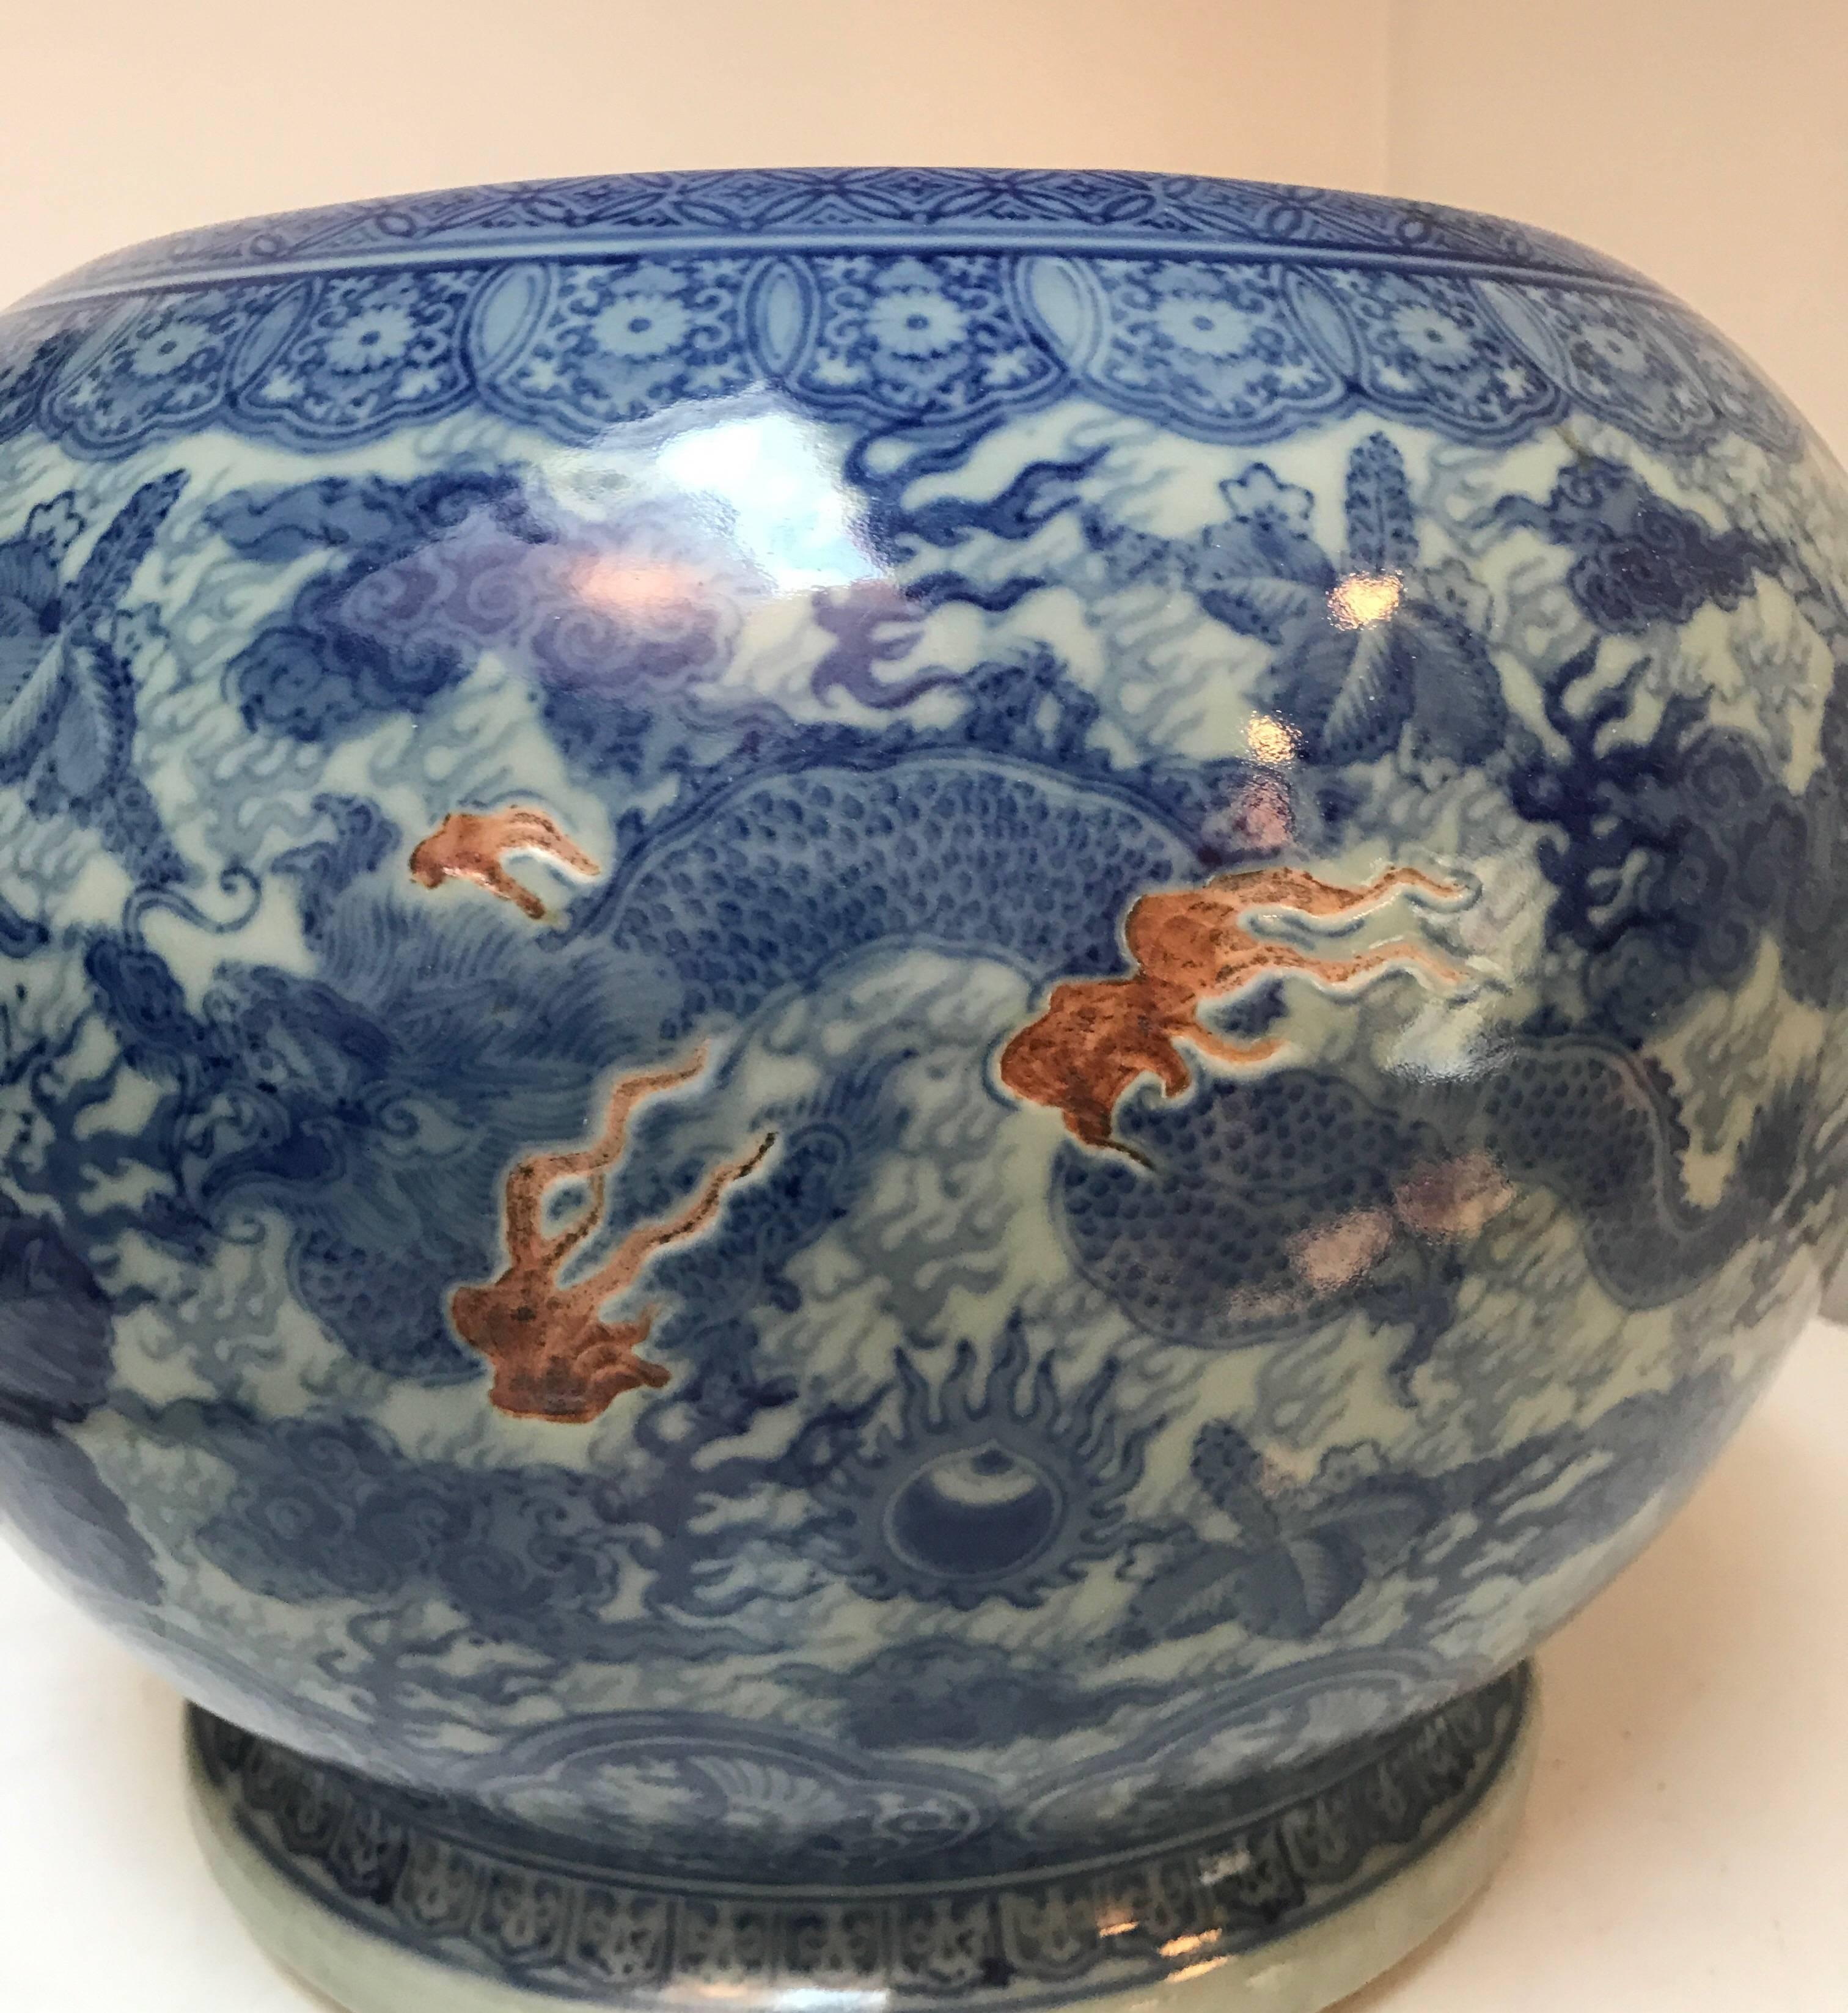 Chinese Export Japanese Blue and White Ceramic Fishbowl Planter Jardinière Cachepot For Sale